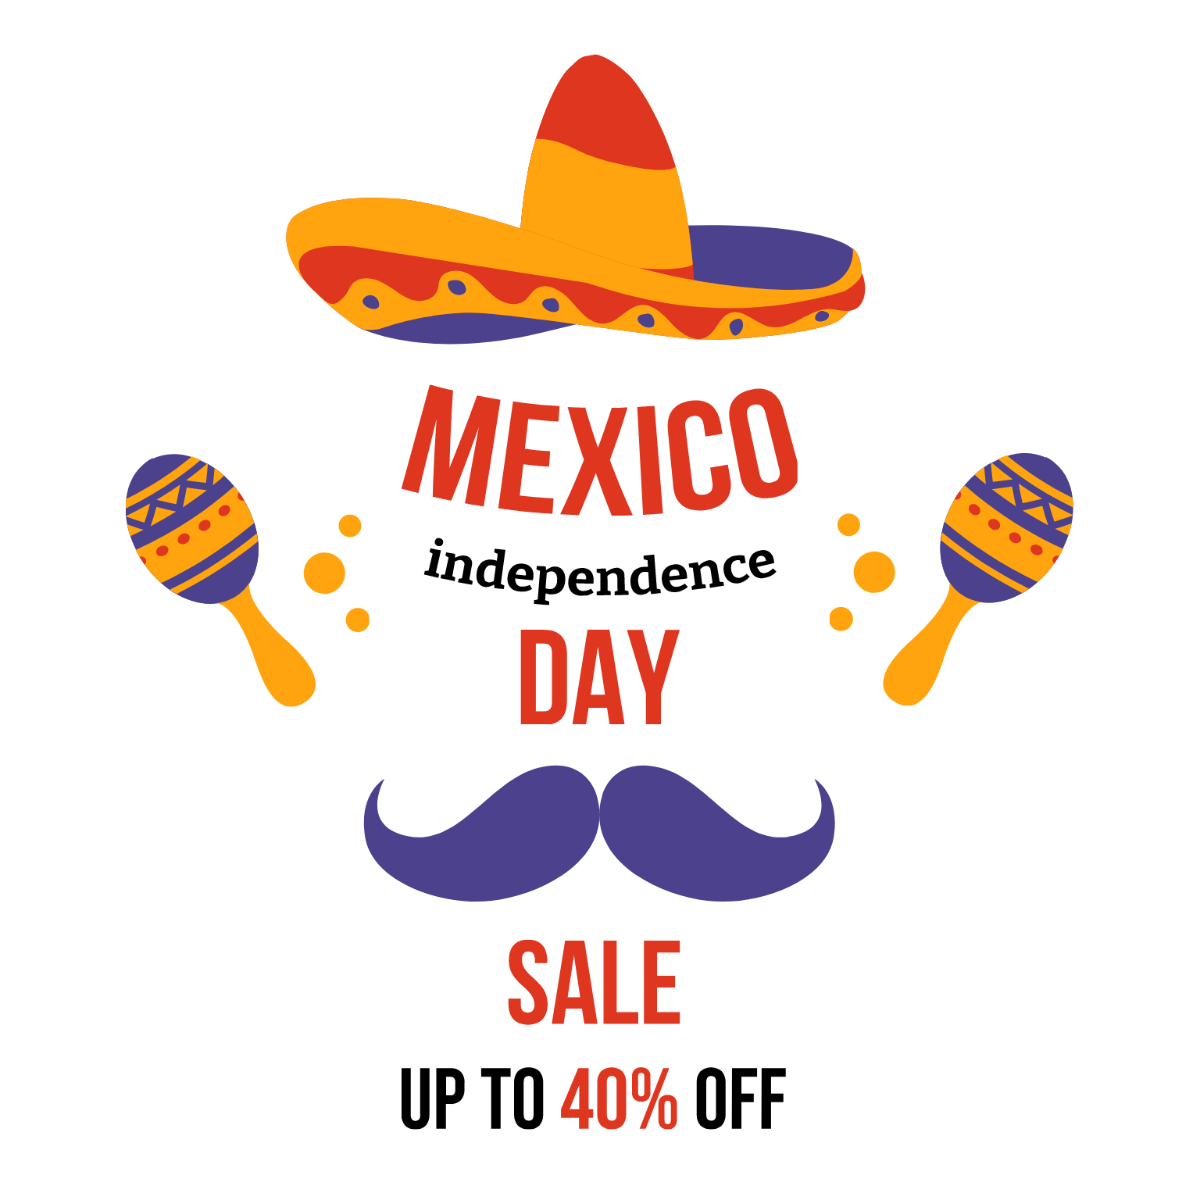 Mexican Independence Day Sale Illustration